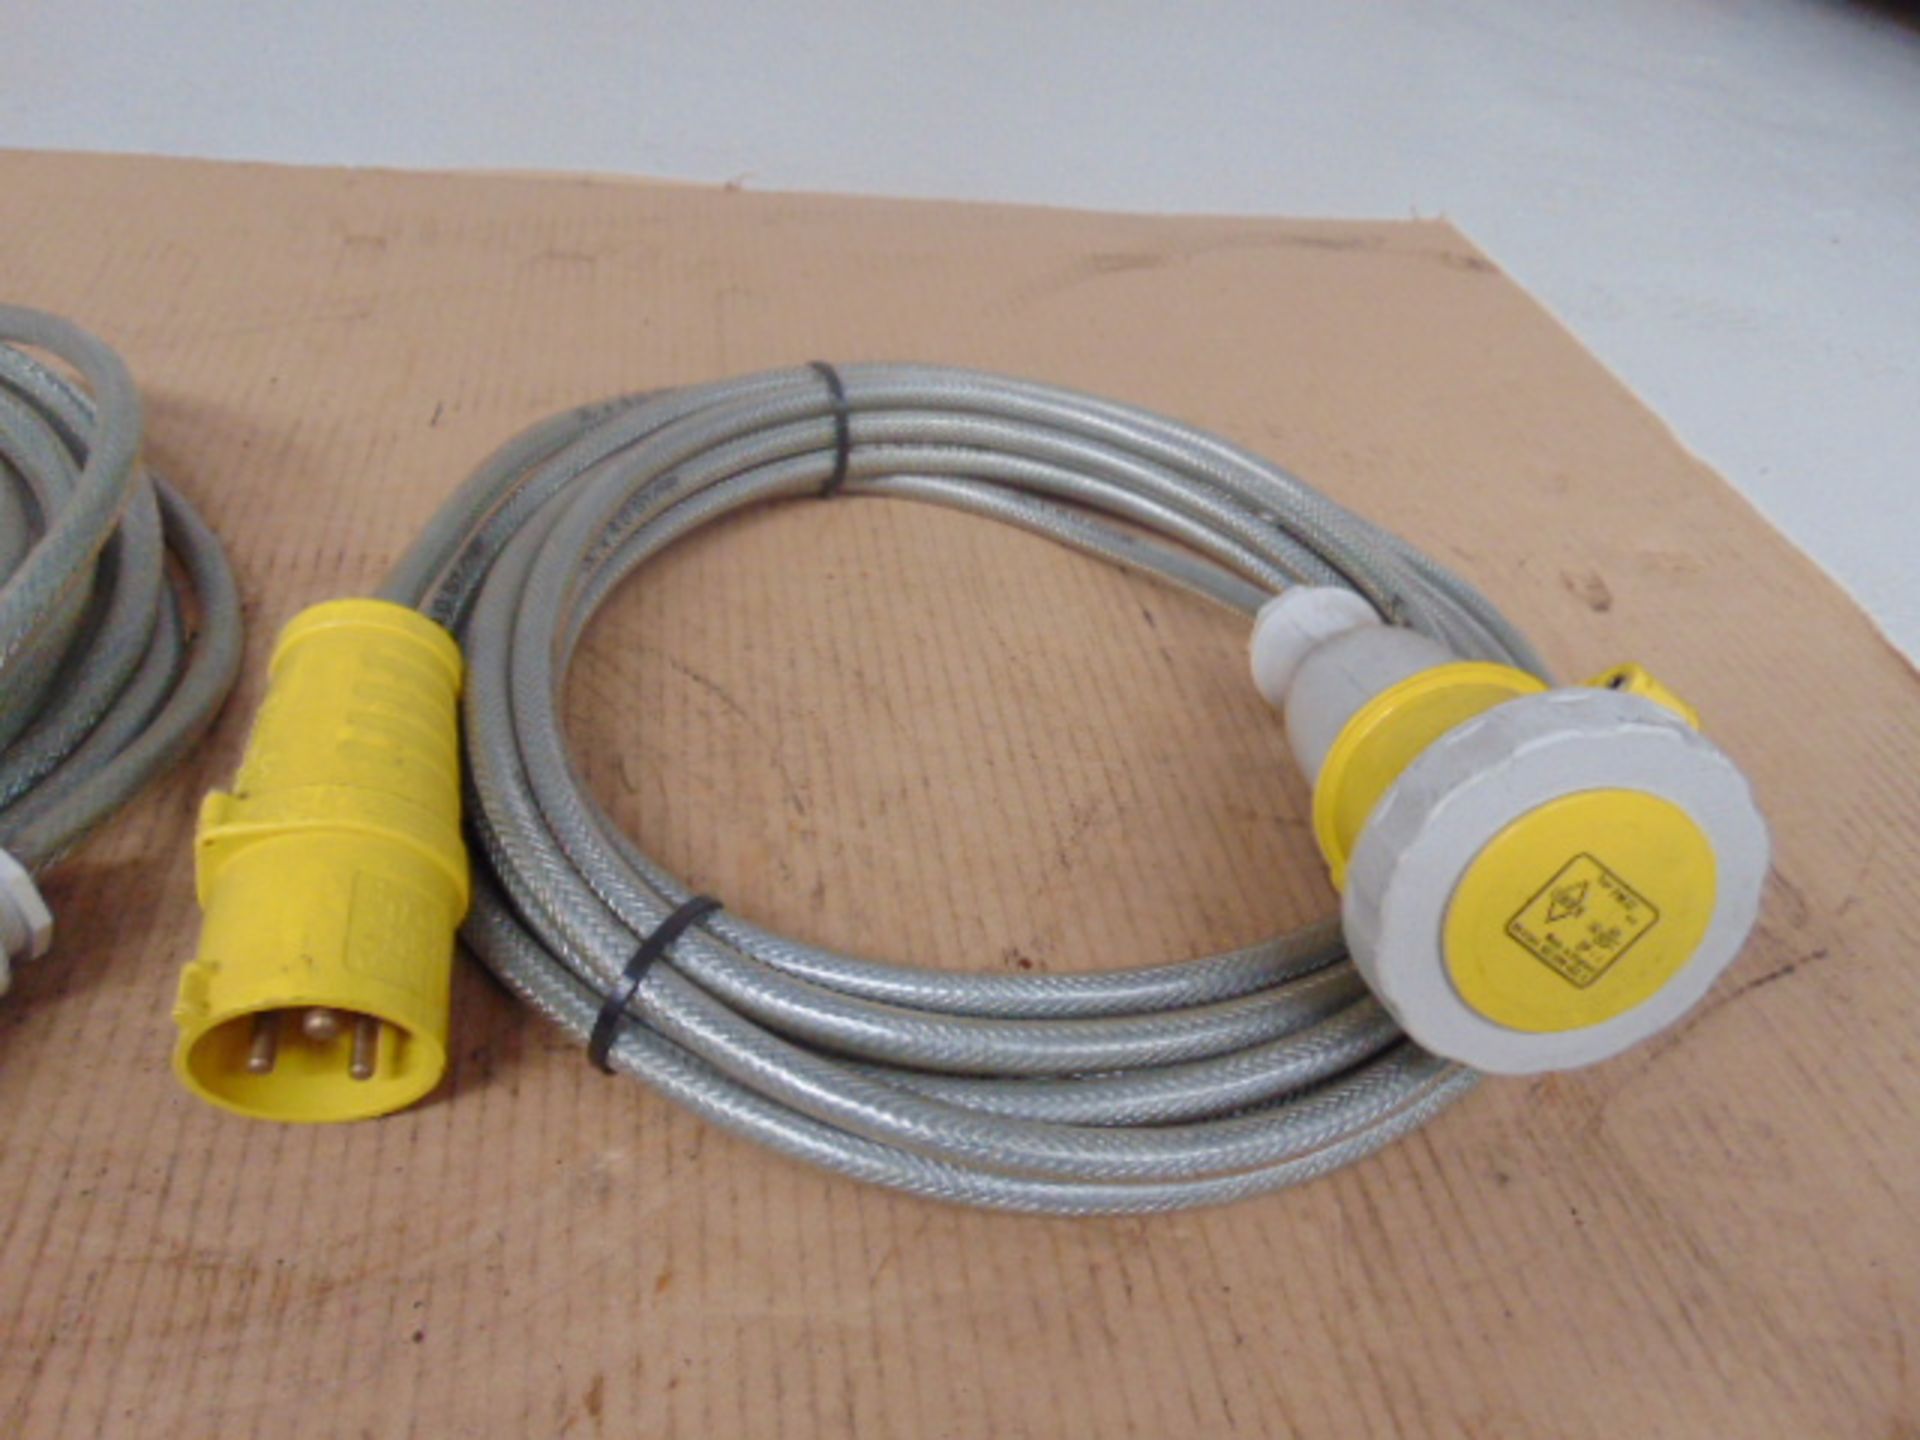 2 x 110V Power Cables - Image 3 of 8